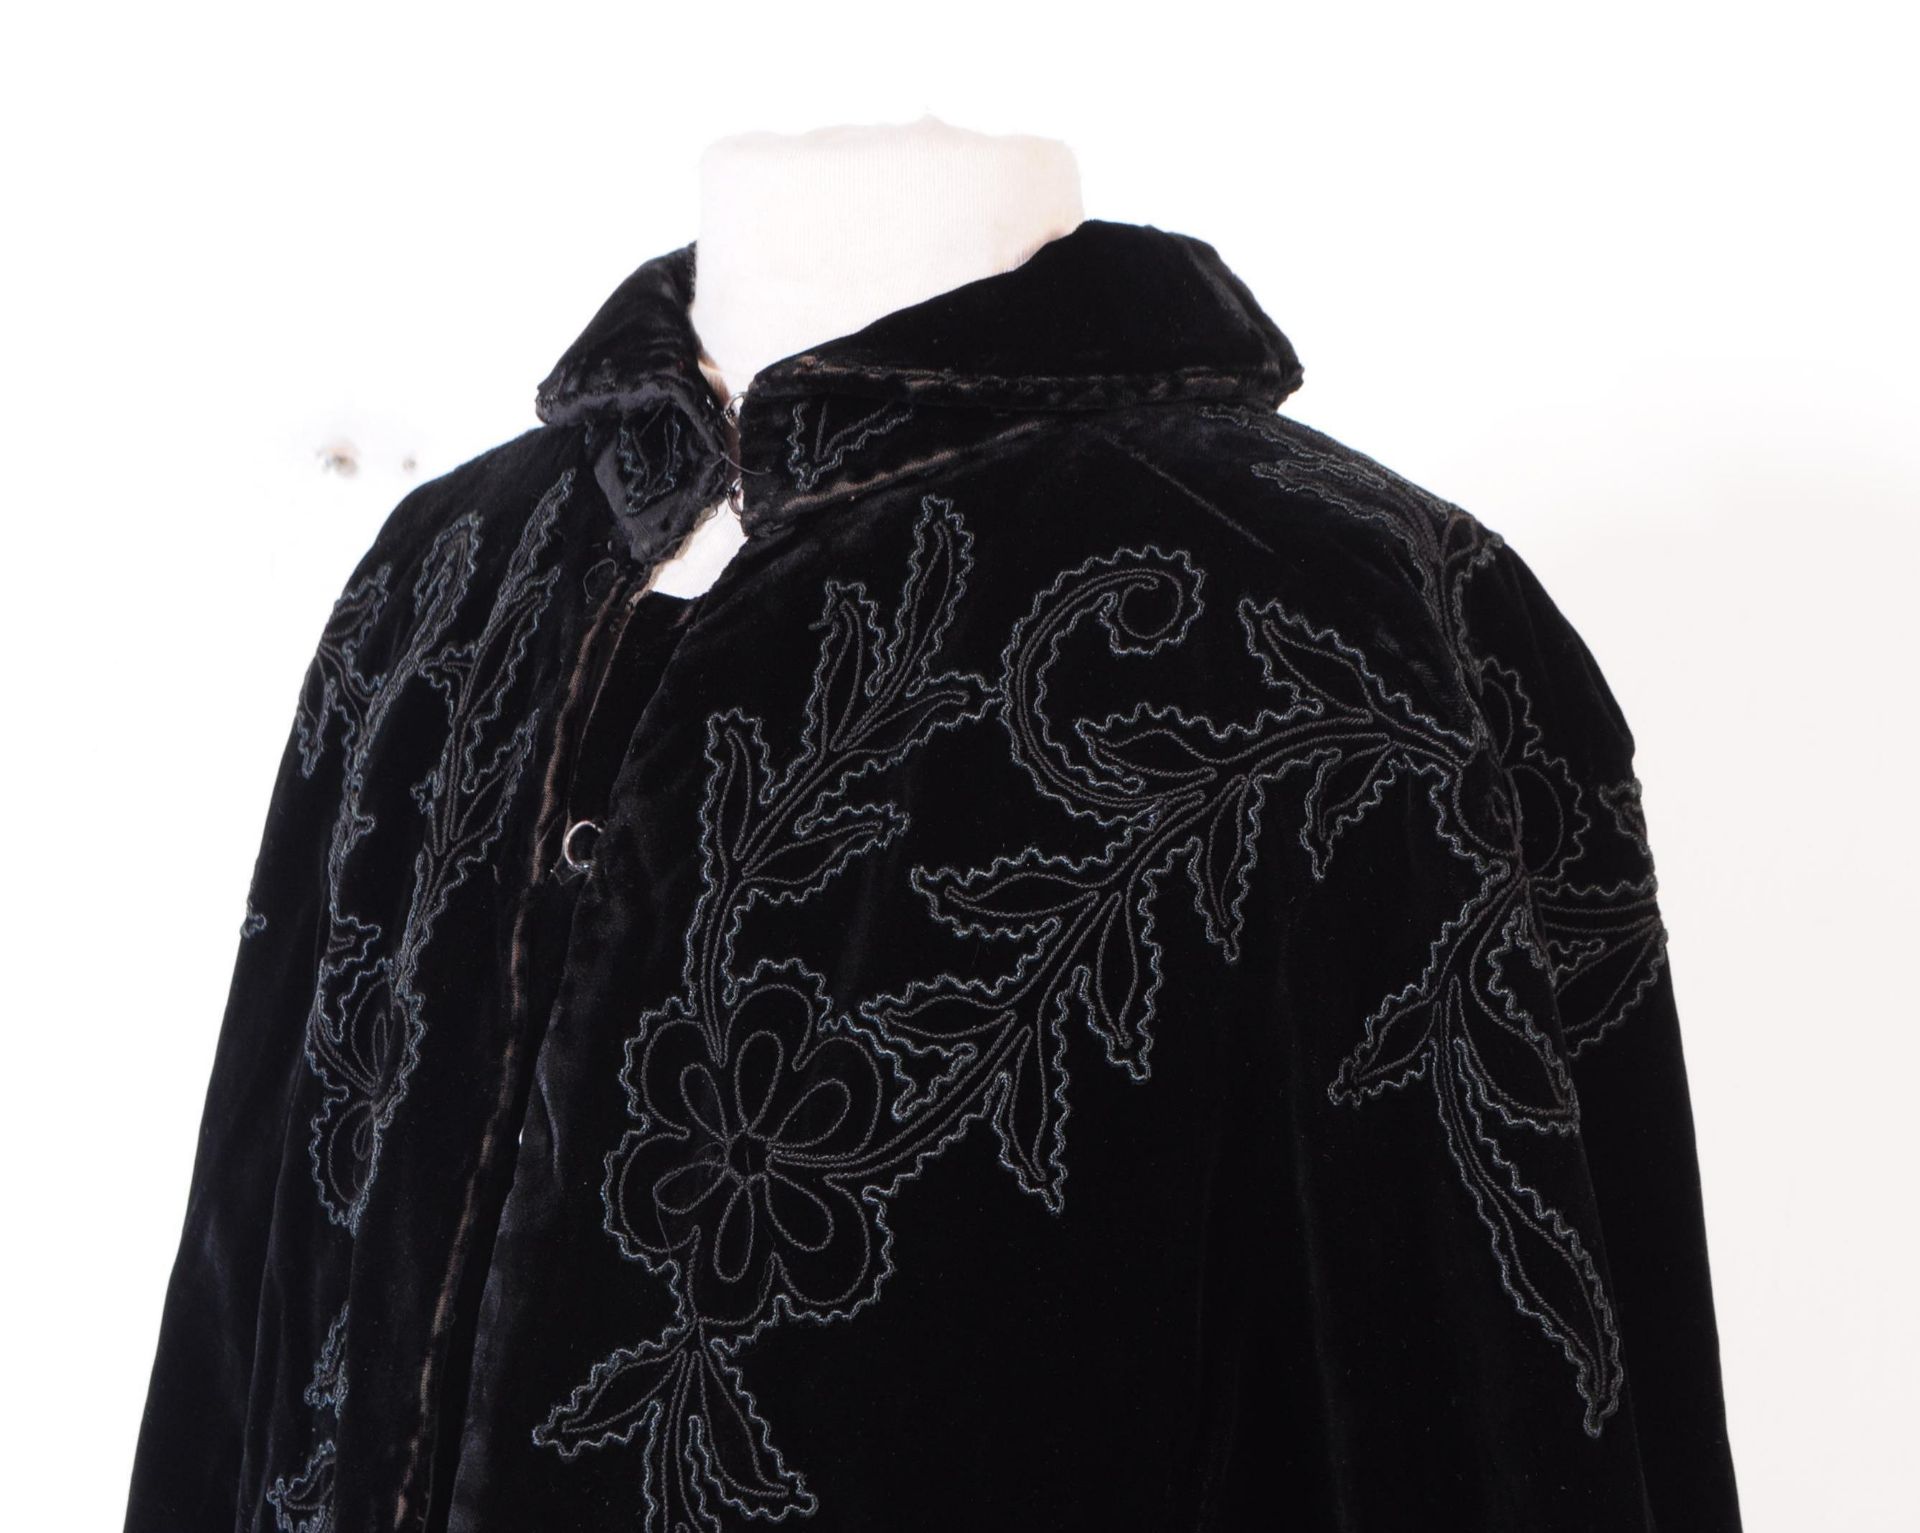 TWO VICTORIAN CLOTHING ITEMS - VELVET CAPE & SHIRT - Image 11 of 12